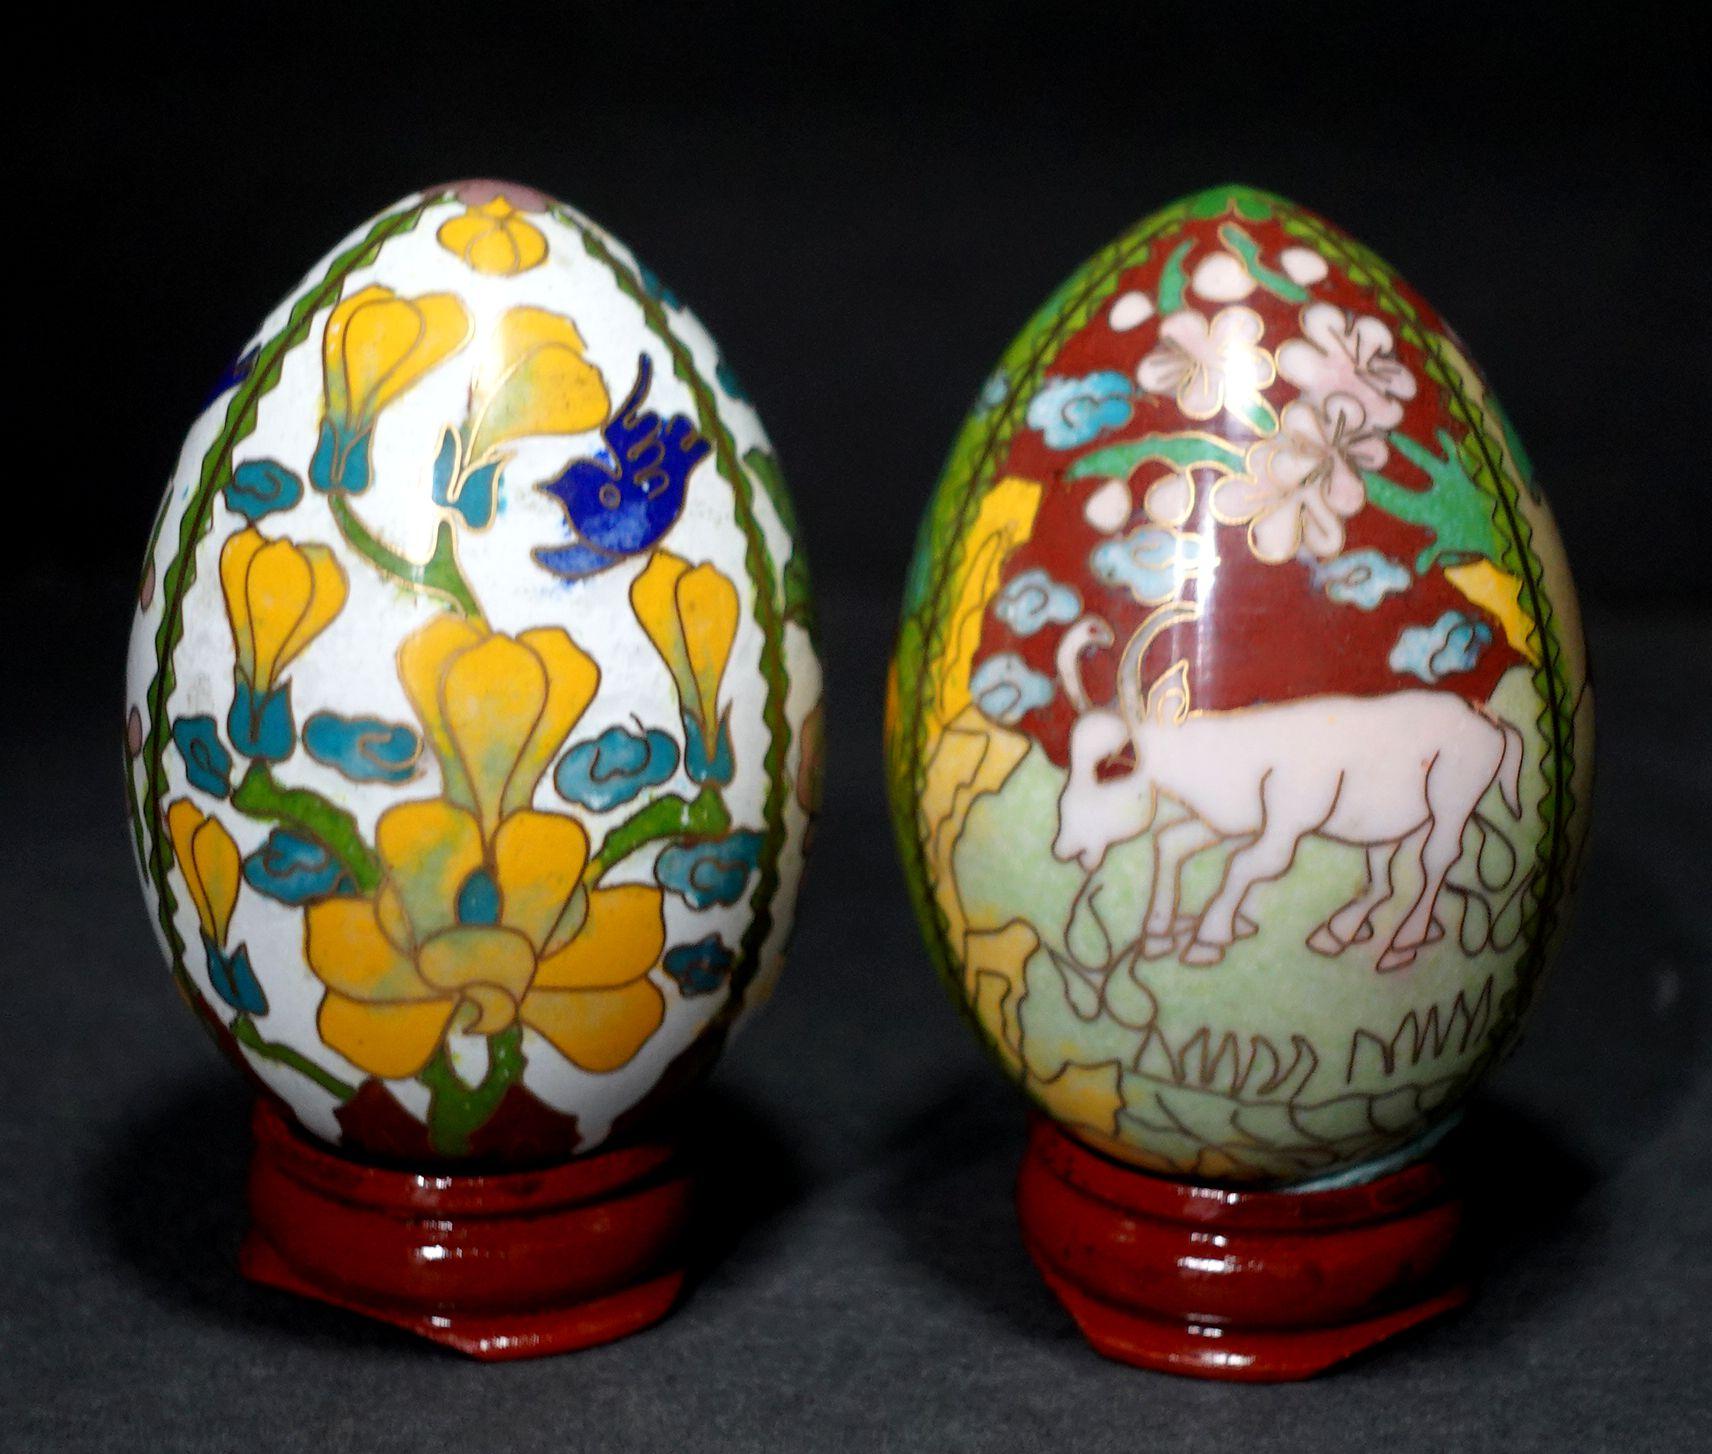 Presenting two beautiful Chinese cloisonné enamel eggs depicting flowers and animals with wood stands, early 20th century.